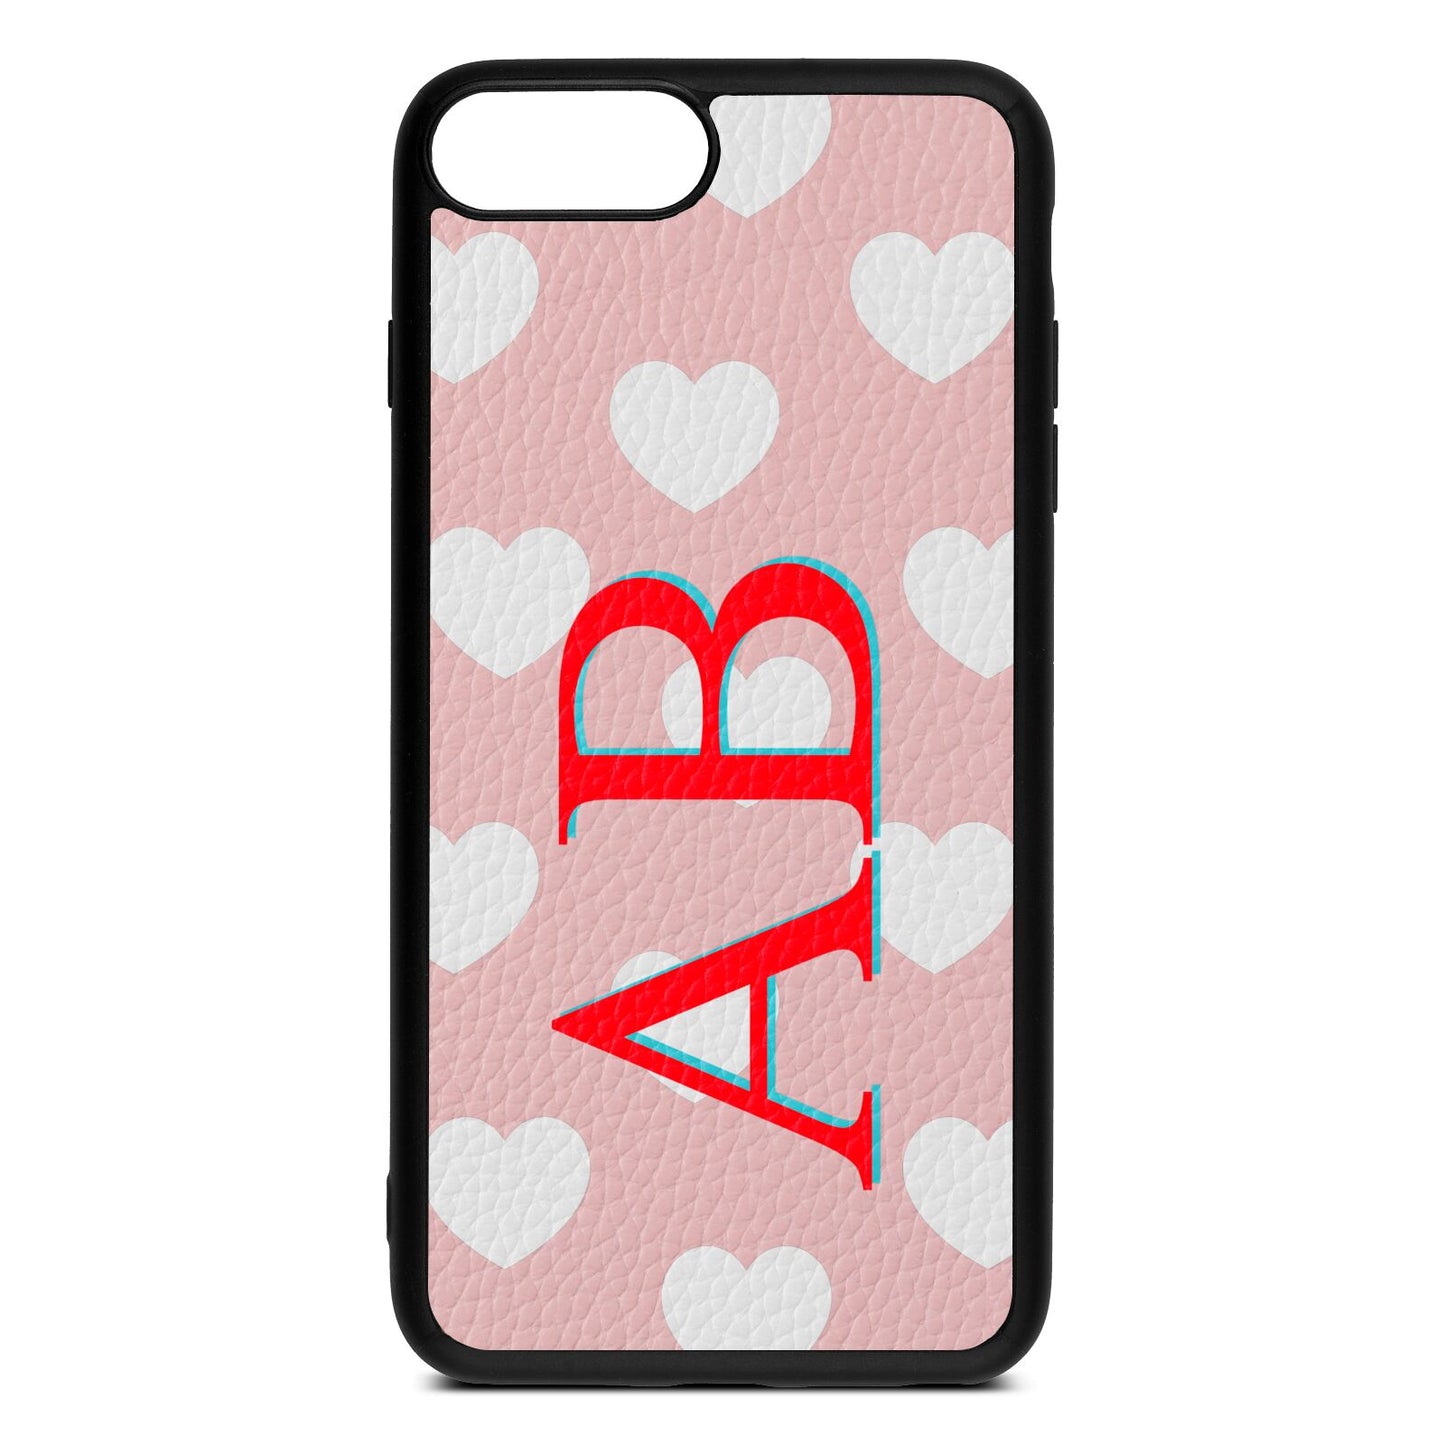 Heart Print Initials Pink Pebble Leather iPhone 8 Plus Case